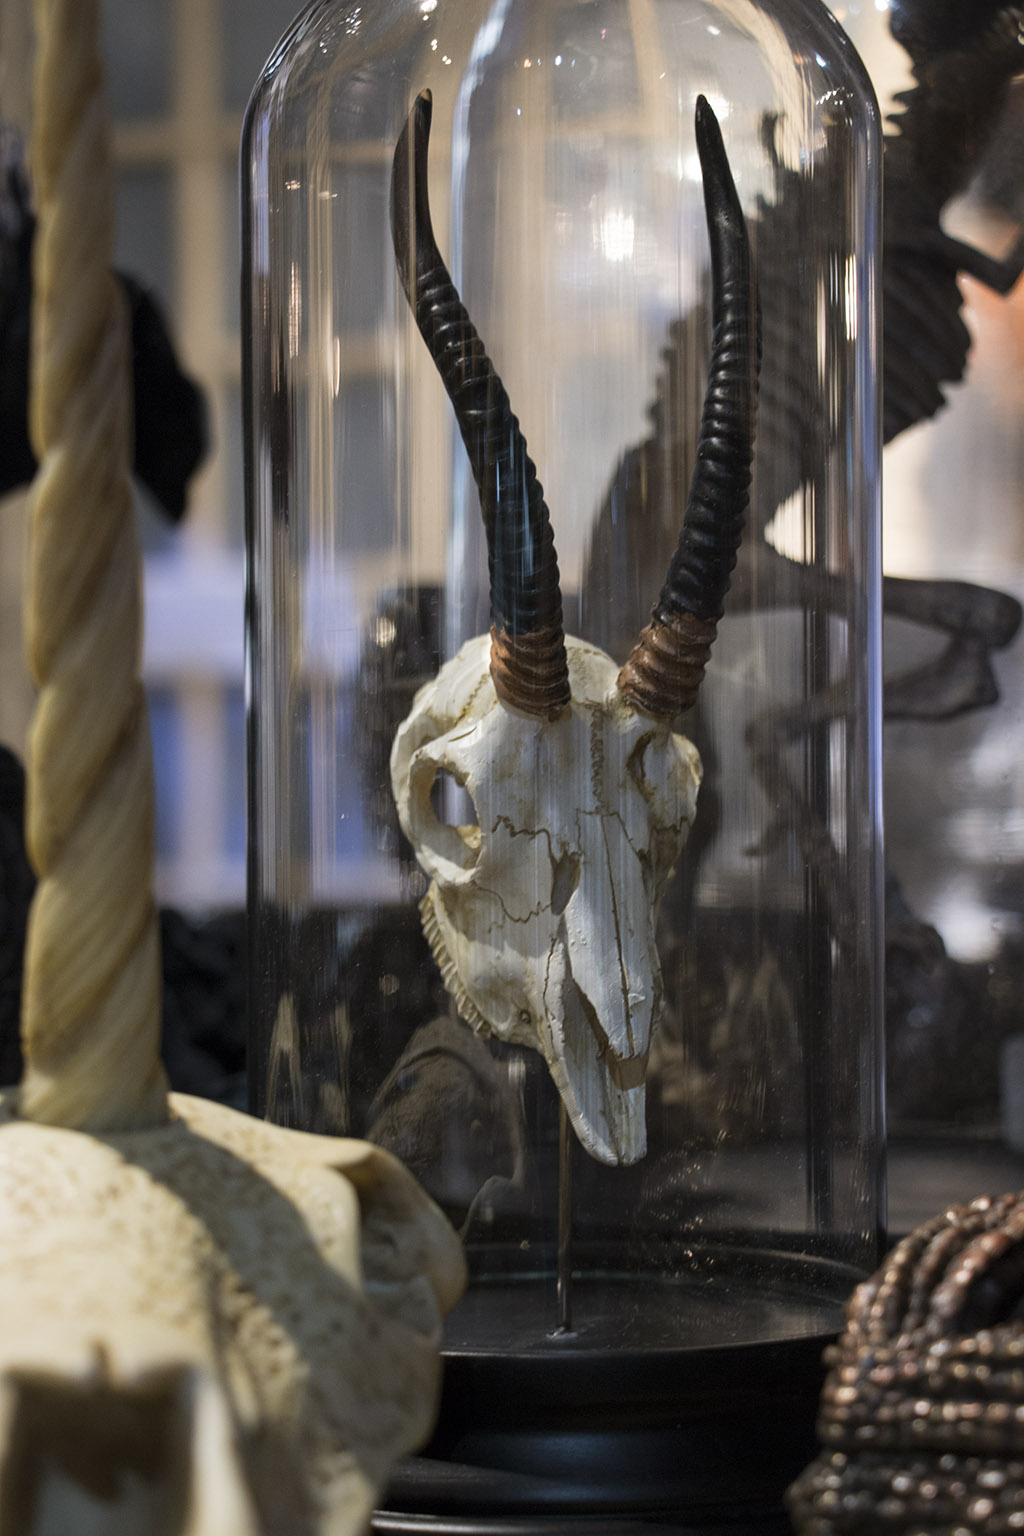 An image of a ghazal skull in a glass containment